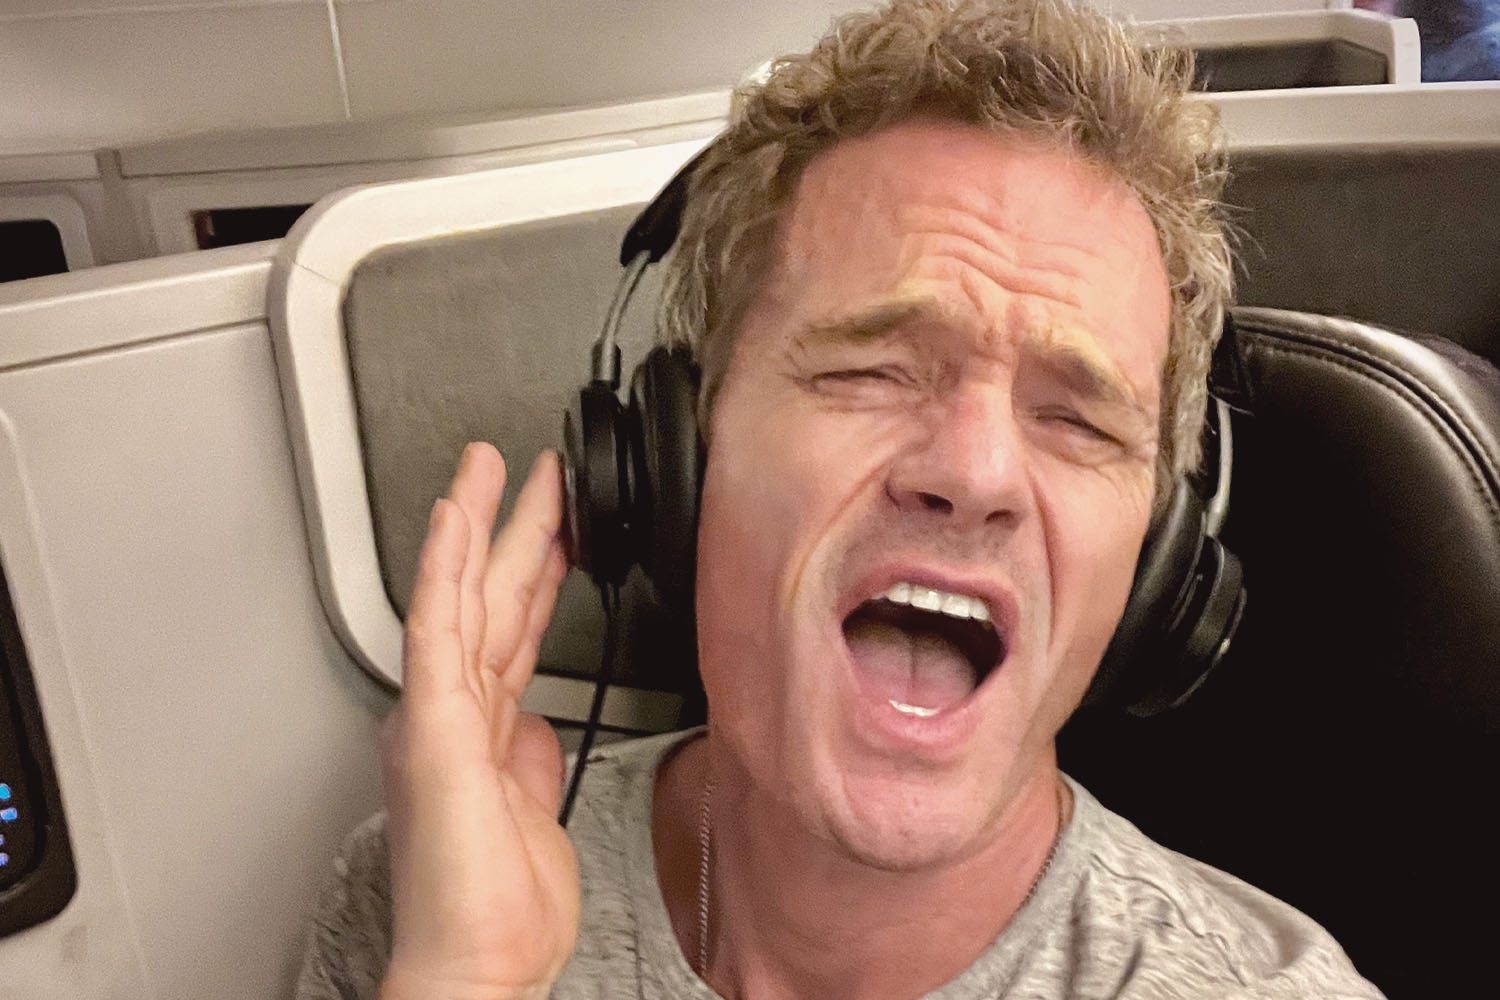 NPH with headphones on and singing.